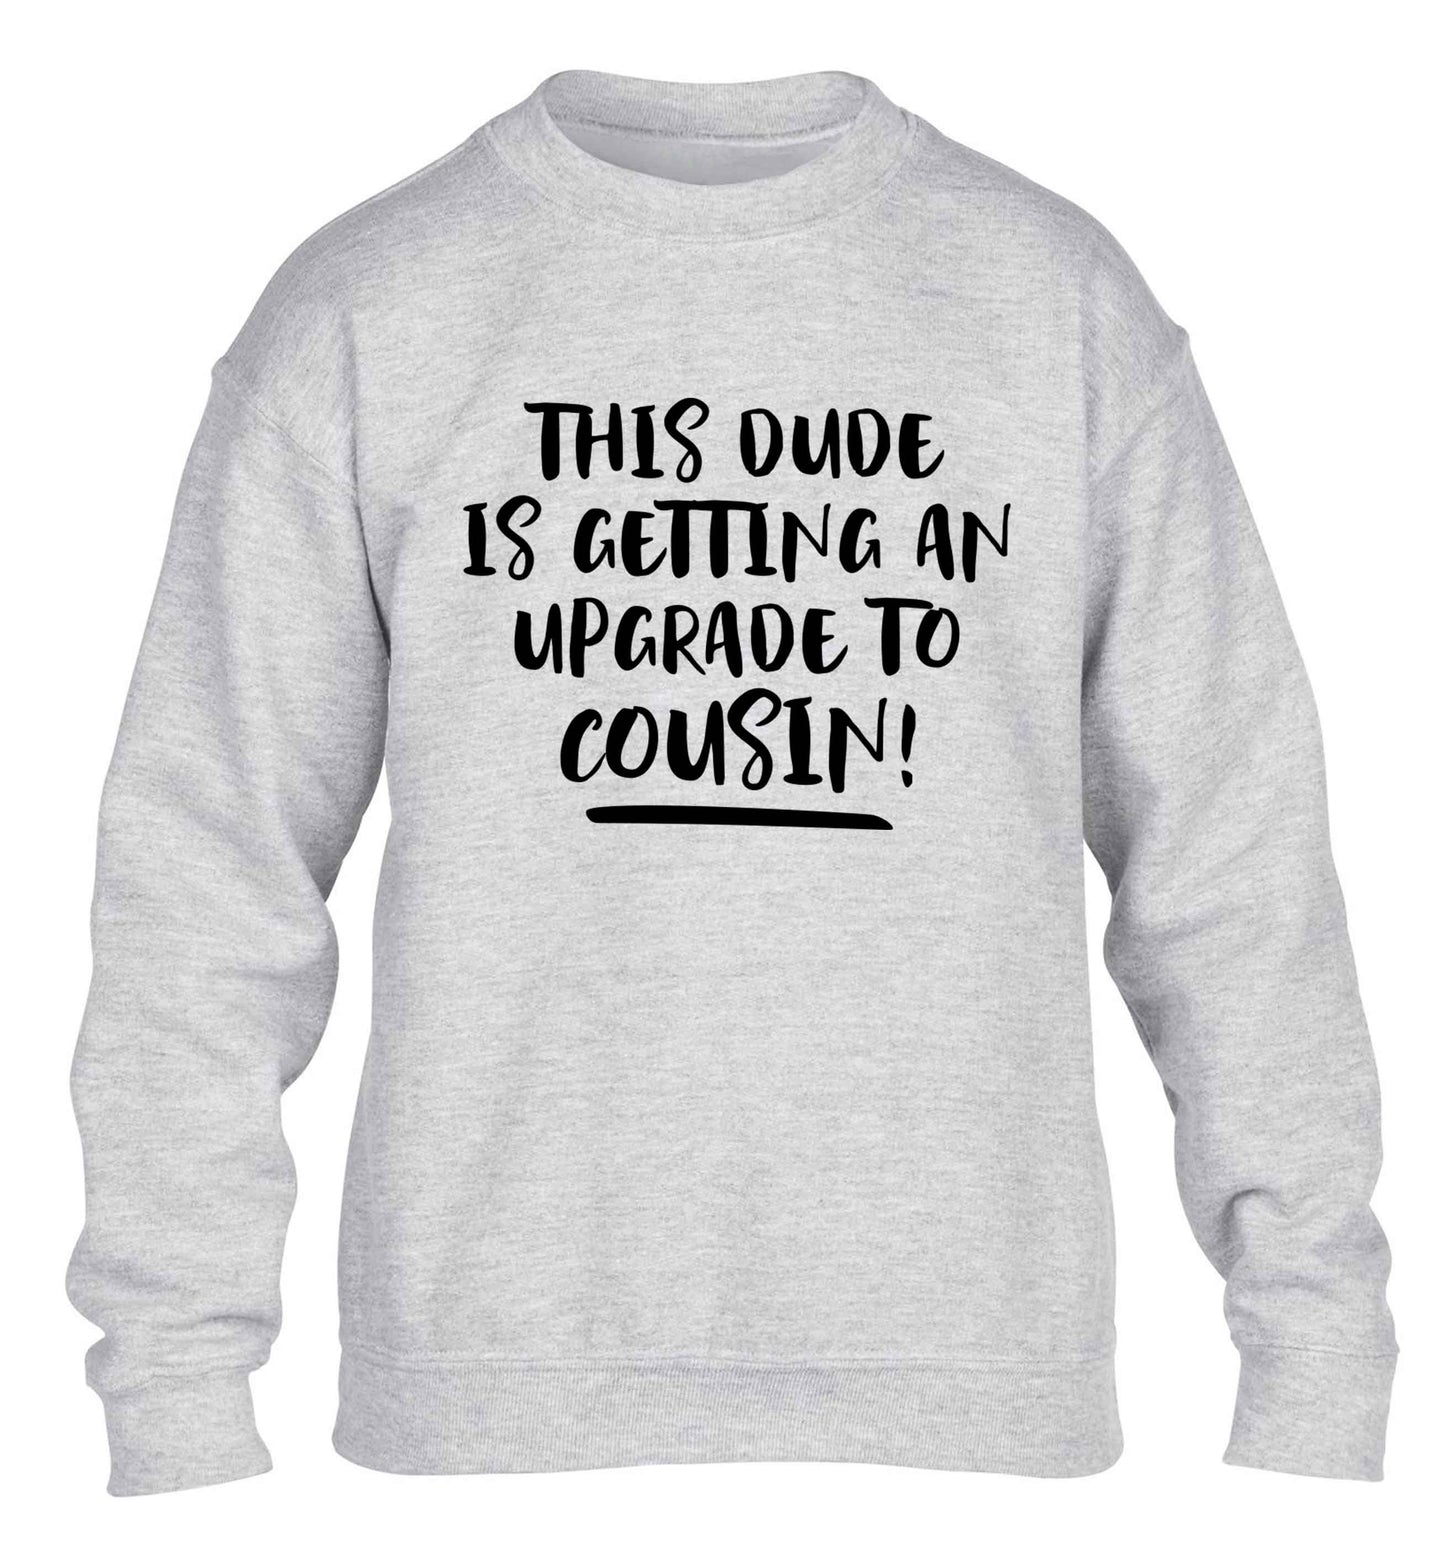 This dude is getting an upgrade to cousin! children's grey sweater 12-13 Years